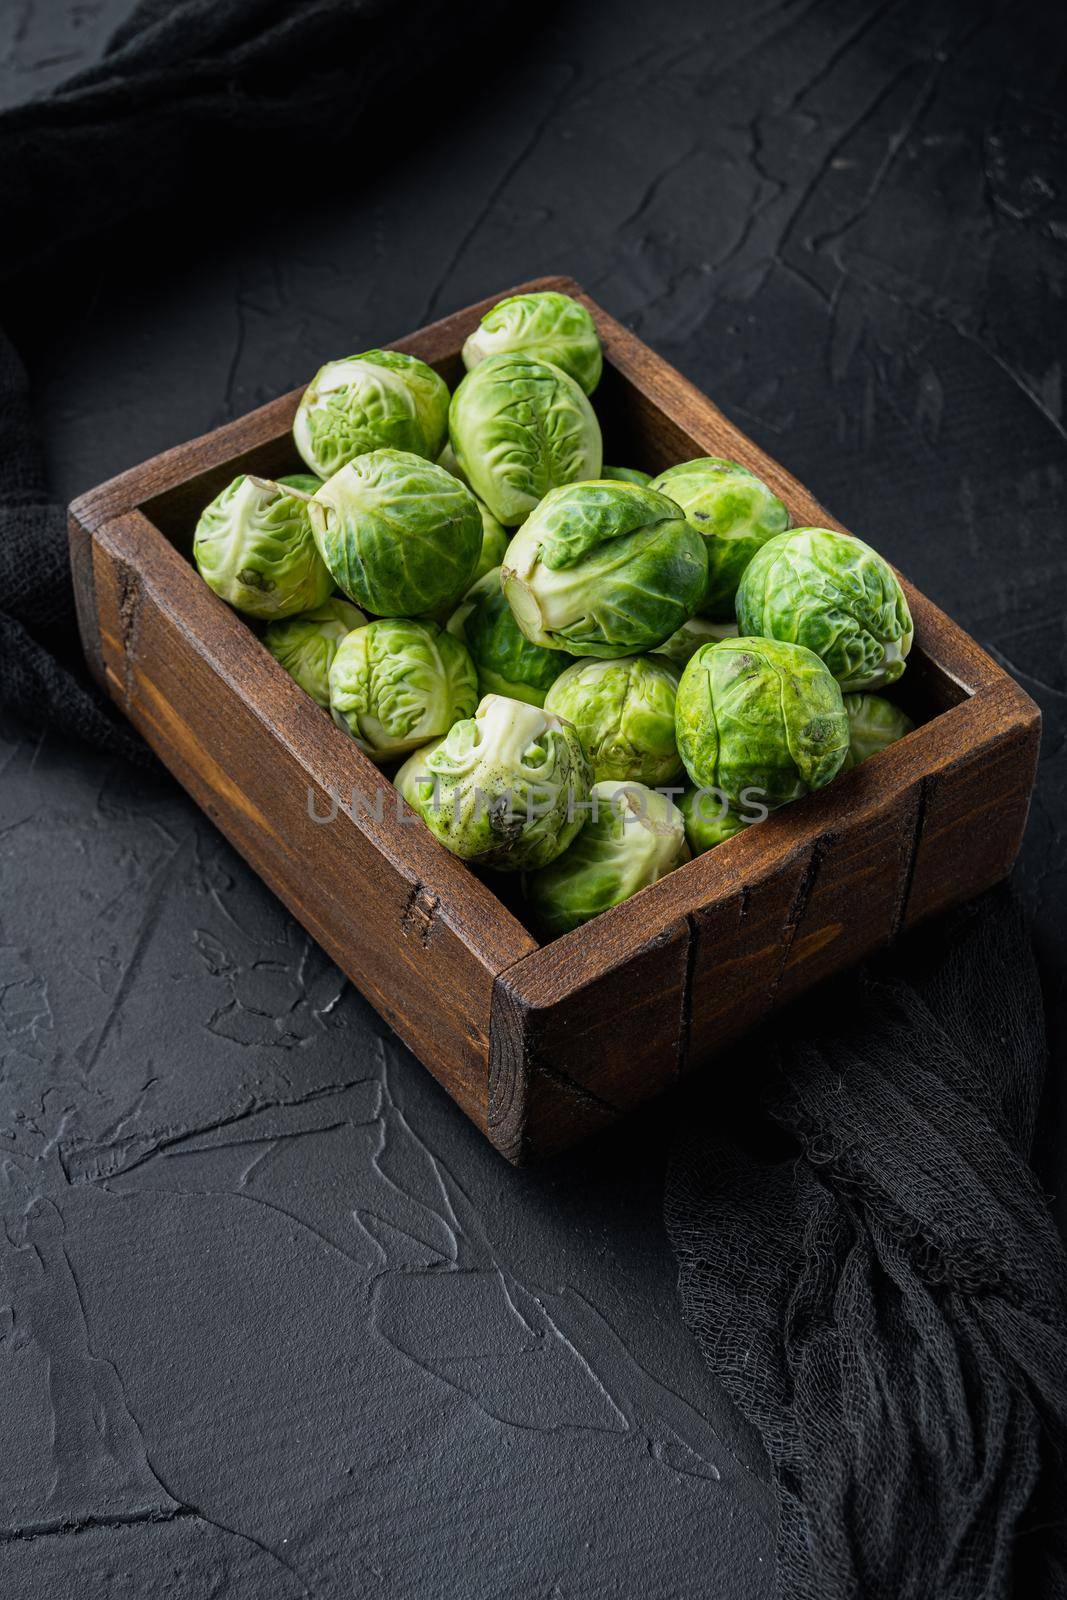 Brussels sprouts, on black textured background by Ilianesolenyi